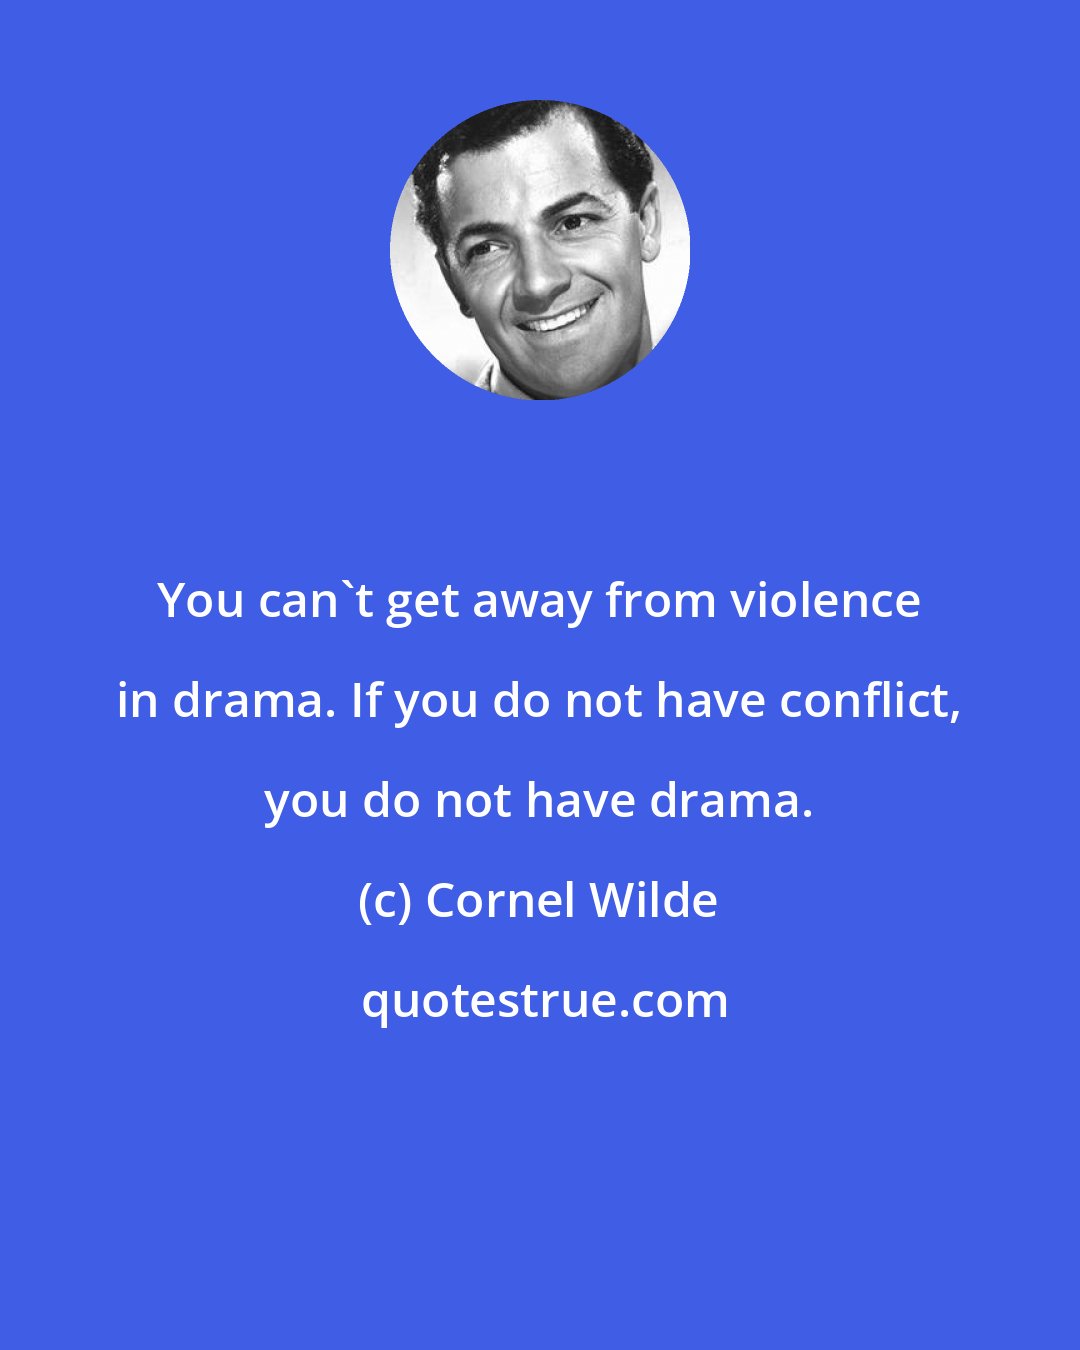 Cornel Wilde: You can't get away from violence in drama. If you do not have conflict, you do not have drama.